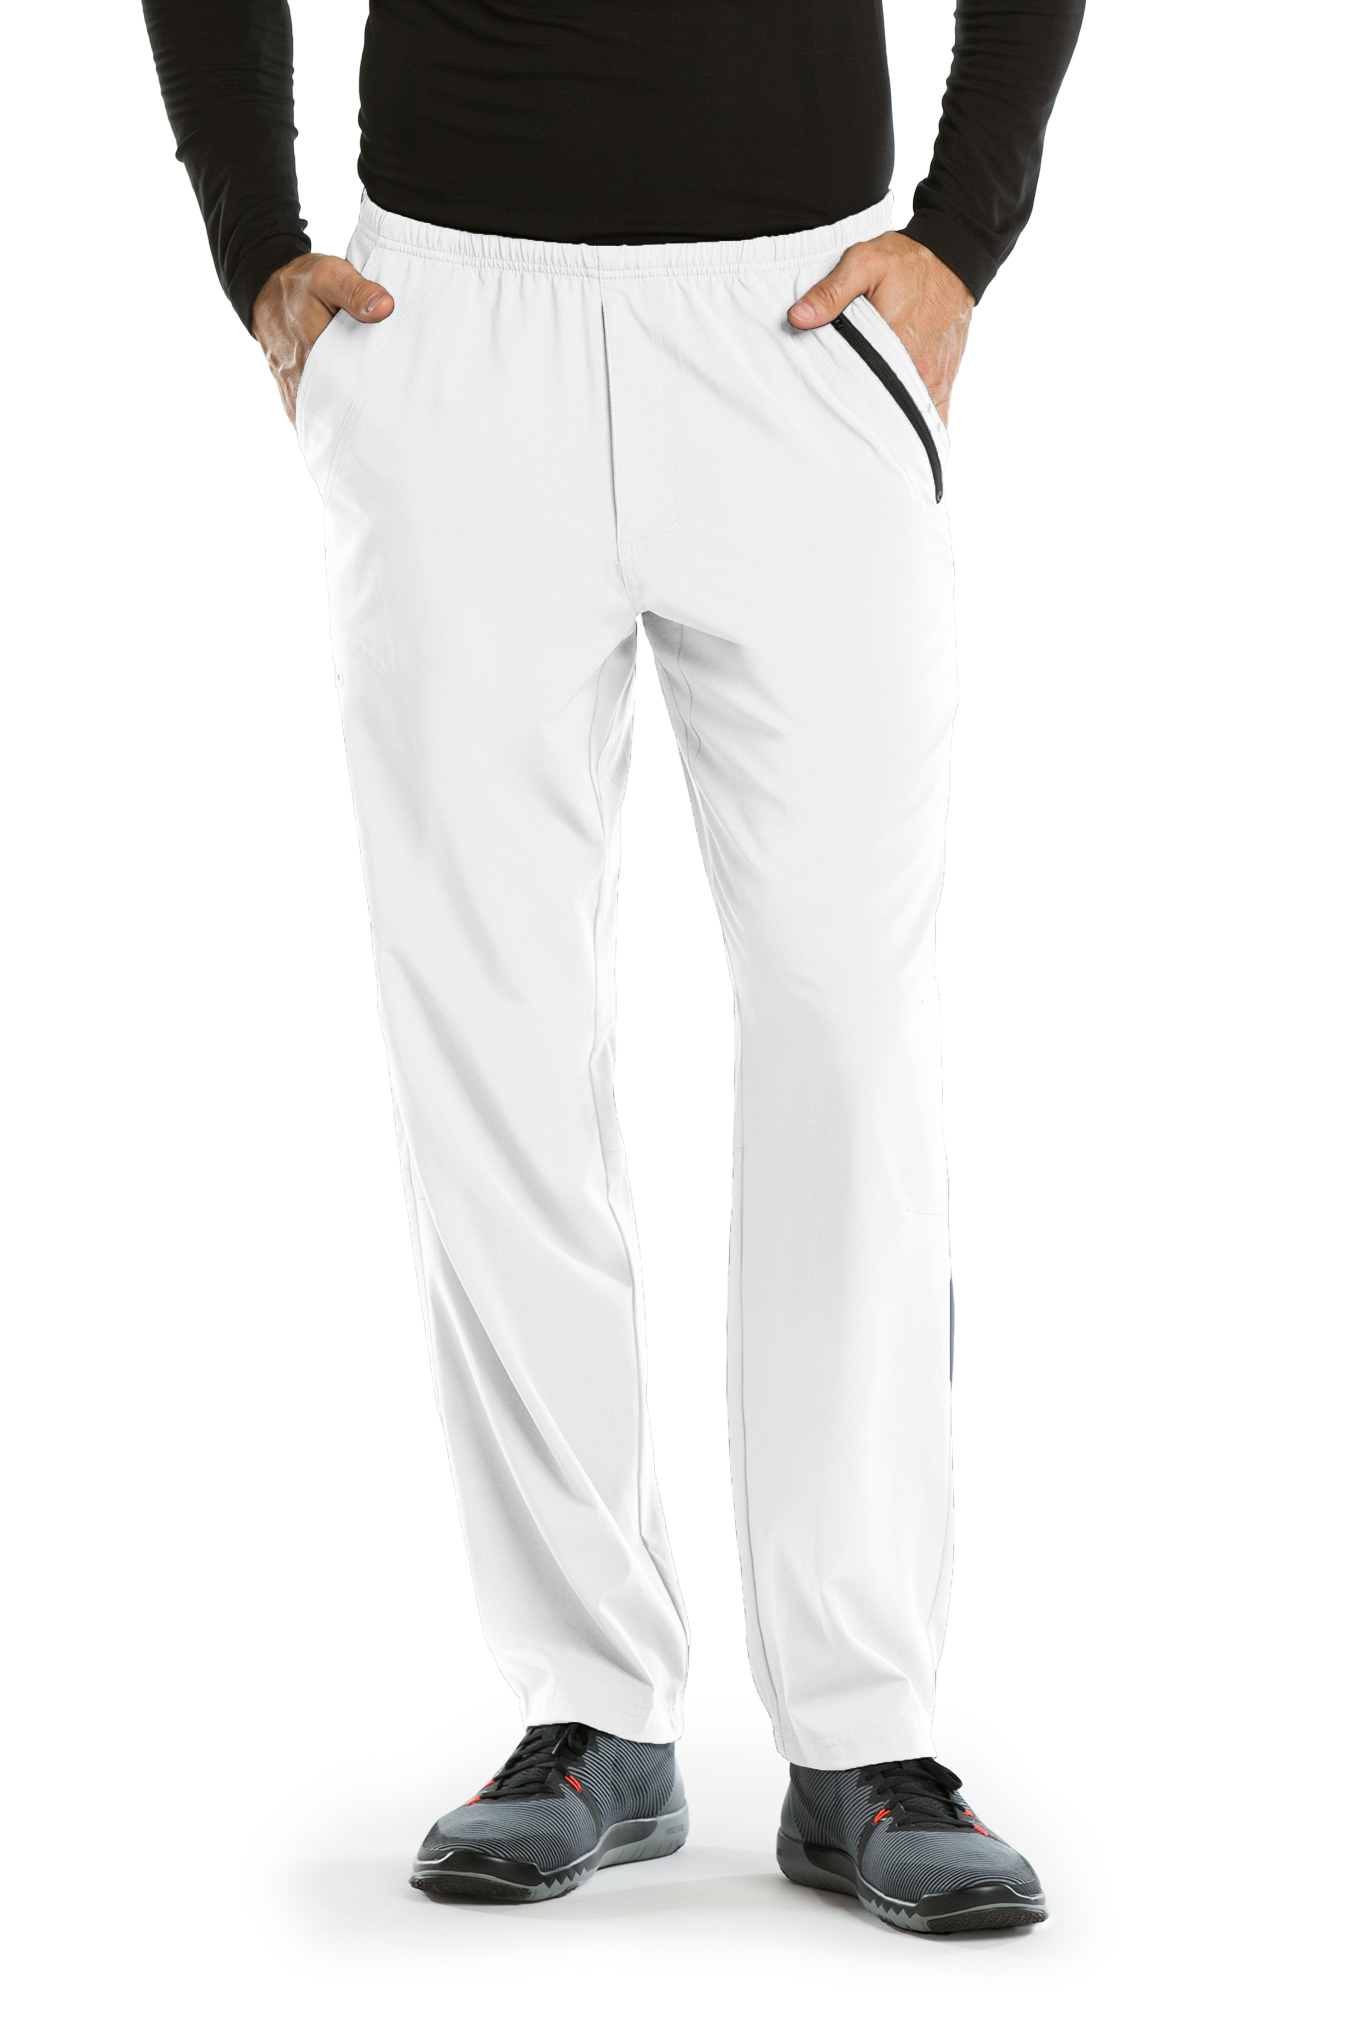 Barco One Amplify Pant-Barco One